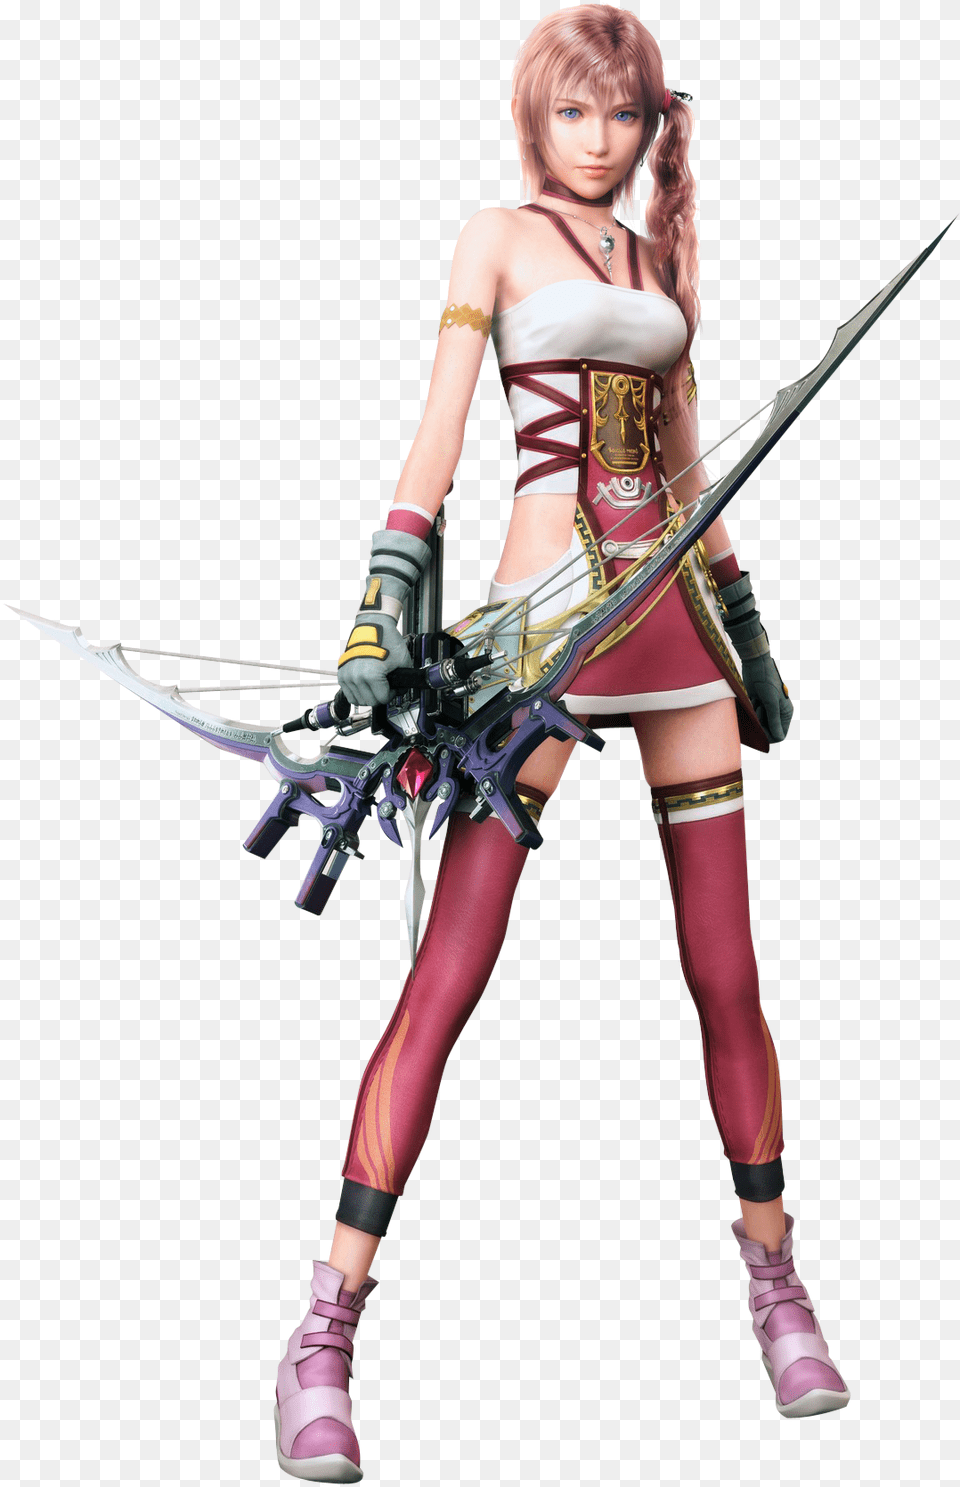 Wutface, Clothing, Costume, Person, Weapon Png